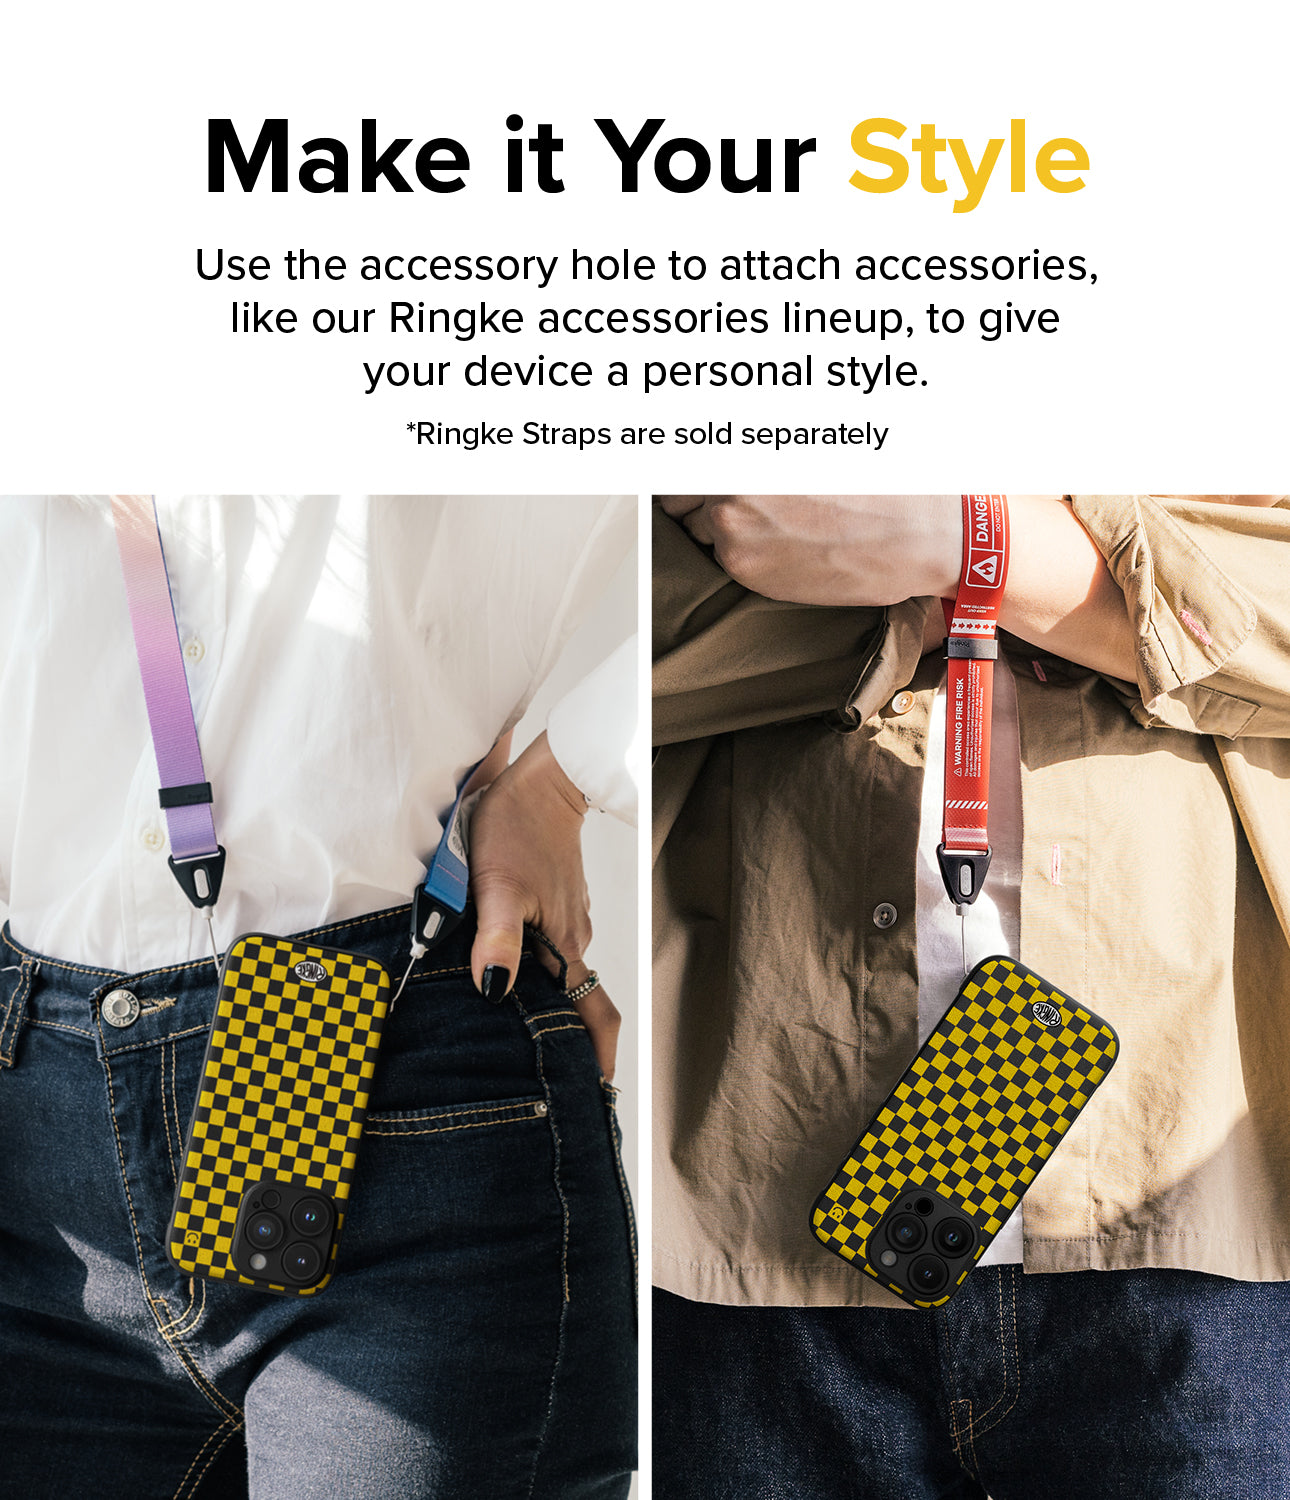 iPhone 15 Pro Max Case | Onyx Design - Checkerboard Yellow - Make it Your Style. Use the accessory hole to attach accessories, like our Ringke accessories lineup, to give your device a personal style.